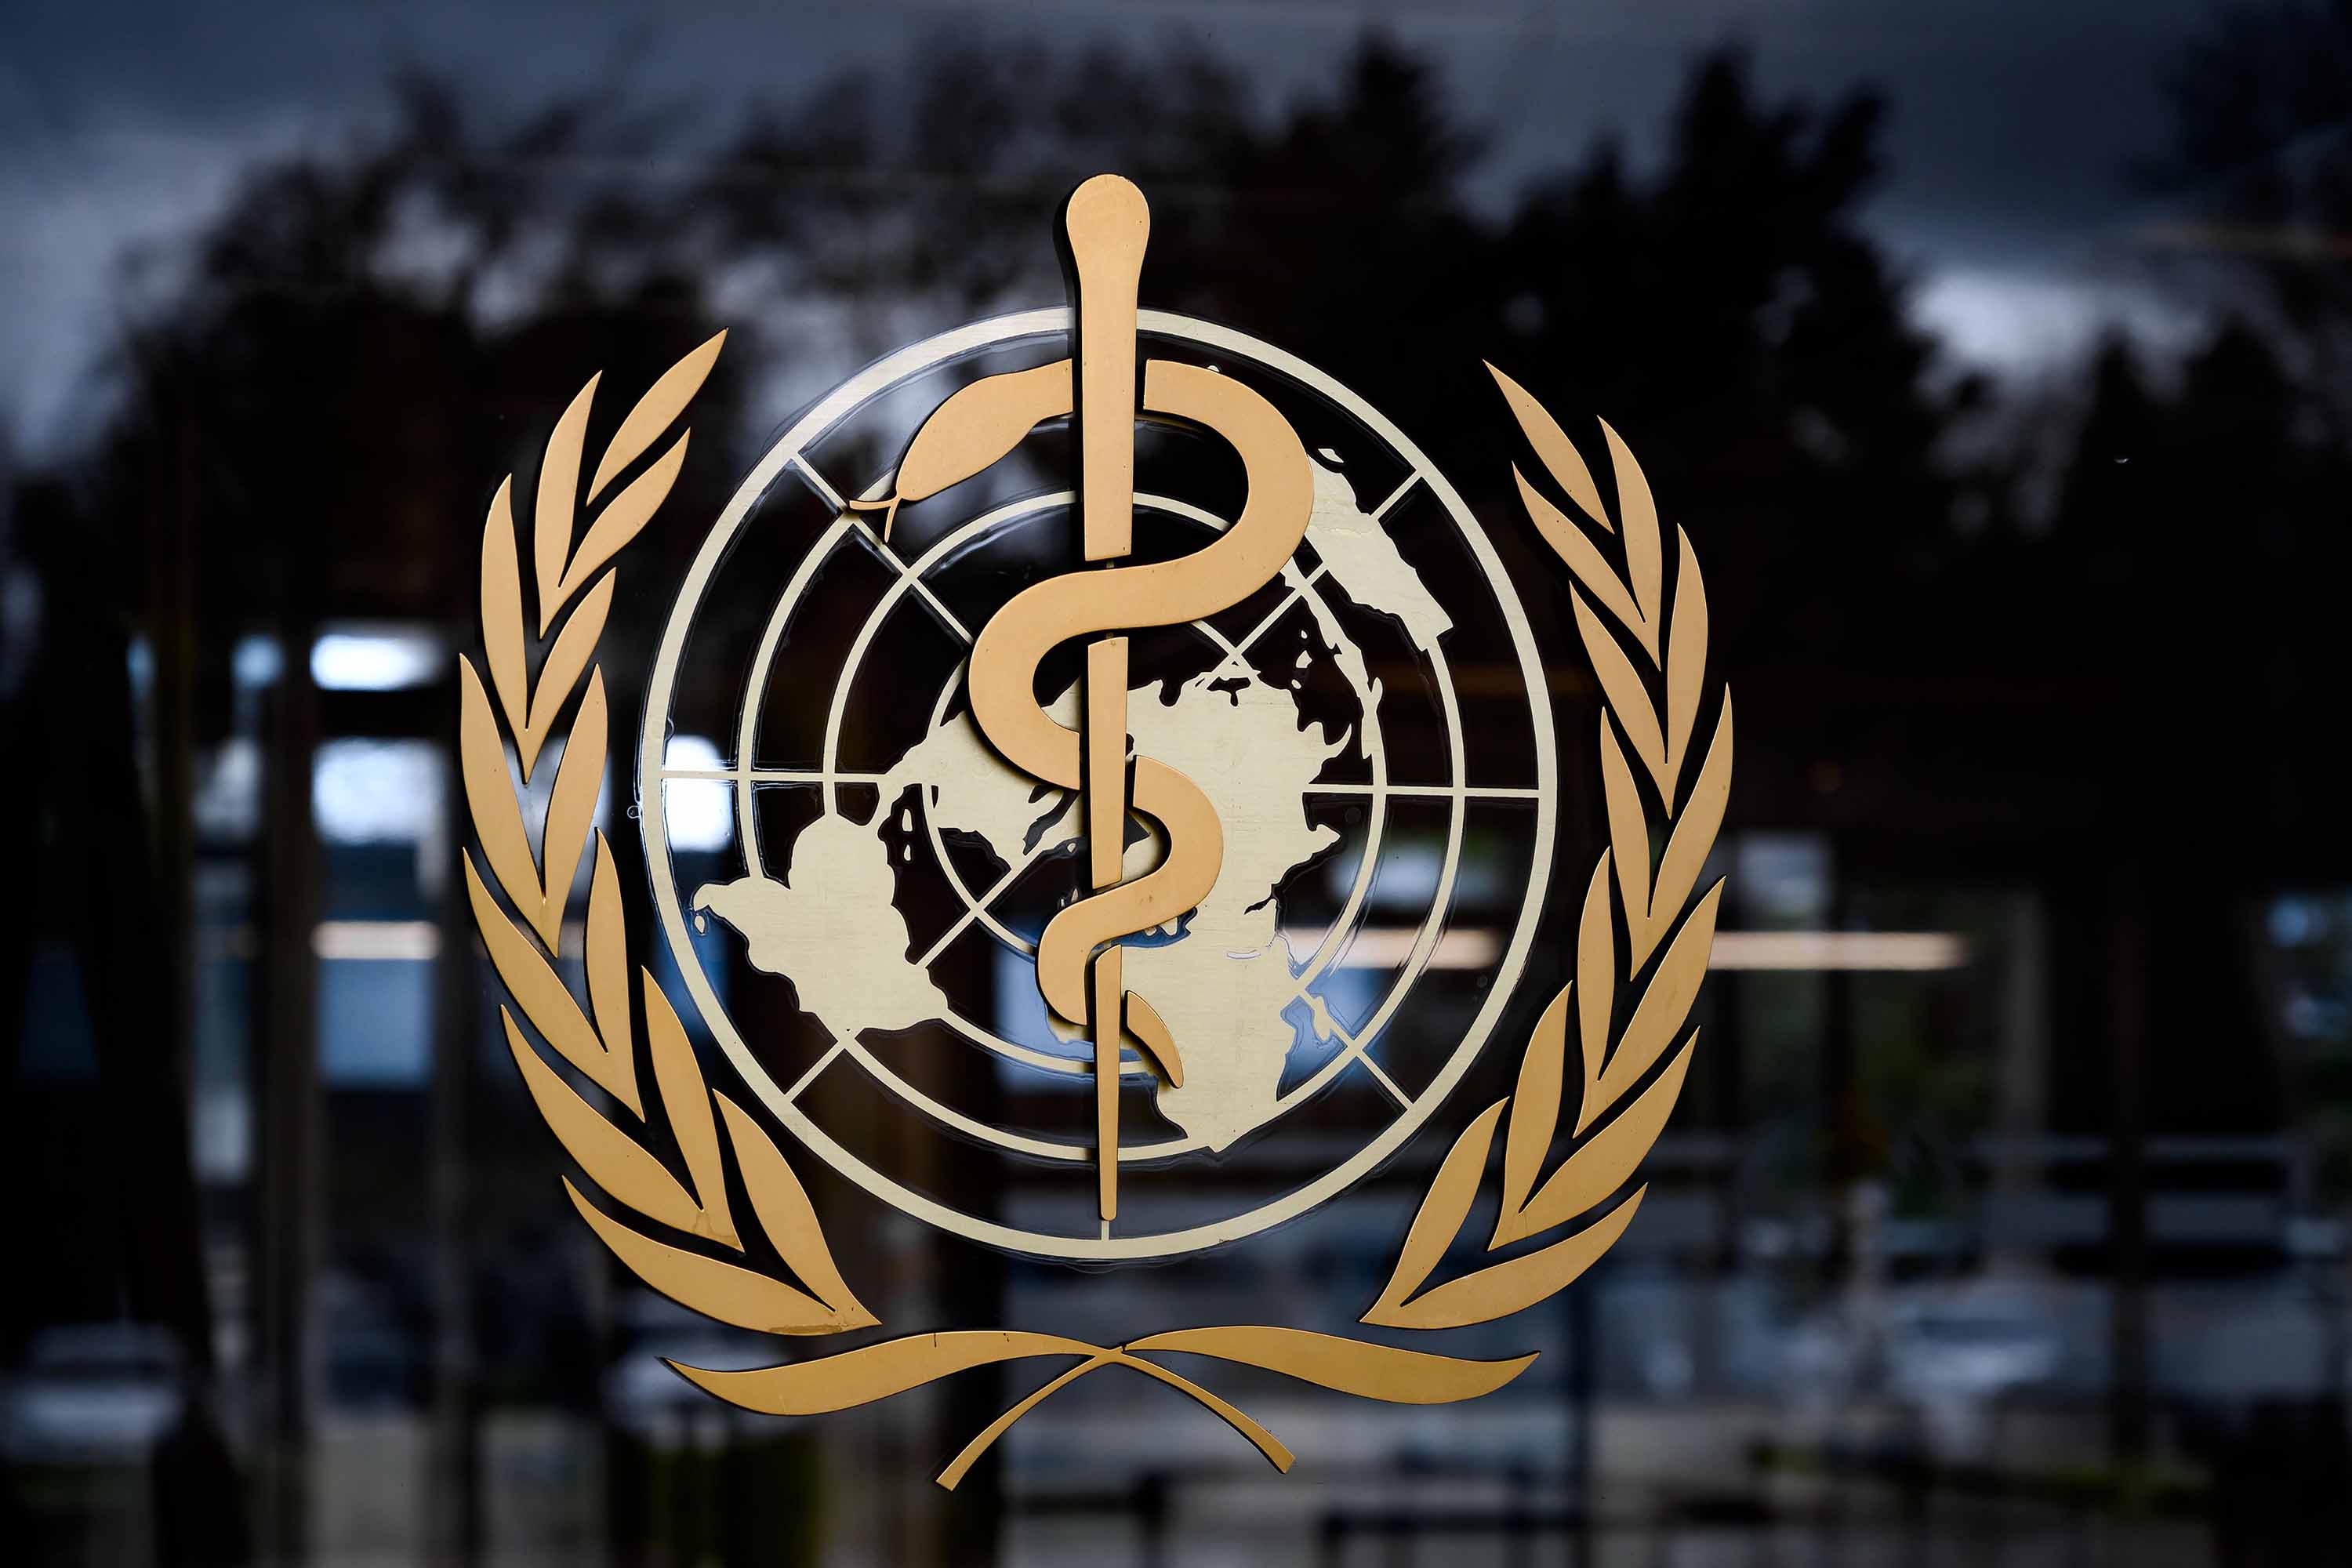 The emblem of the World Health Organization is pictured at its headquarters in Geneva, Switzerland, on March 9.